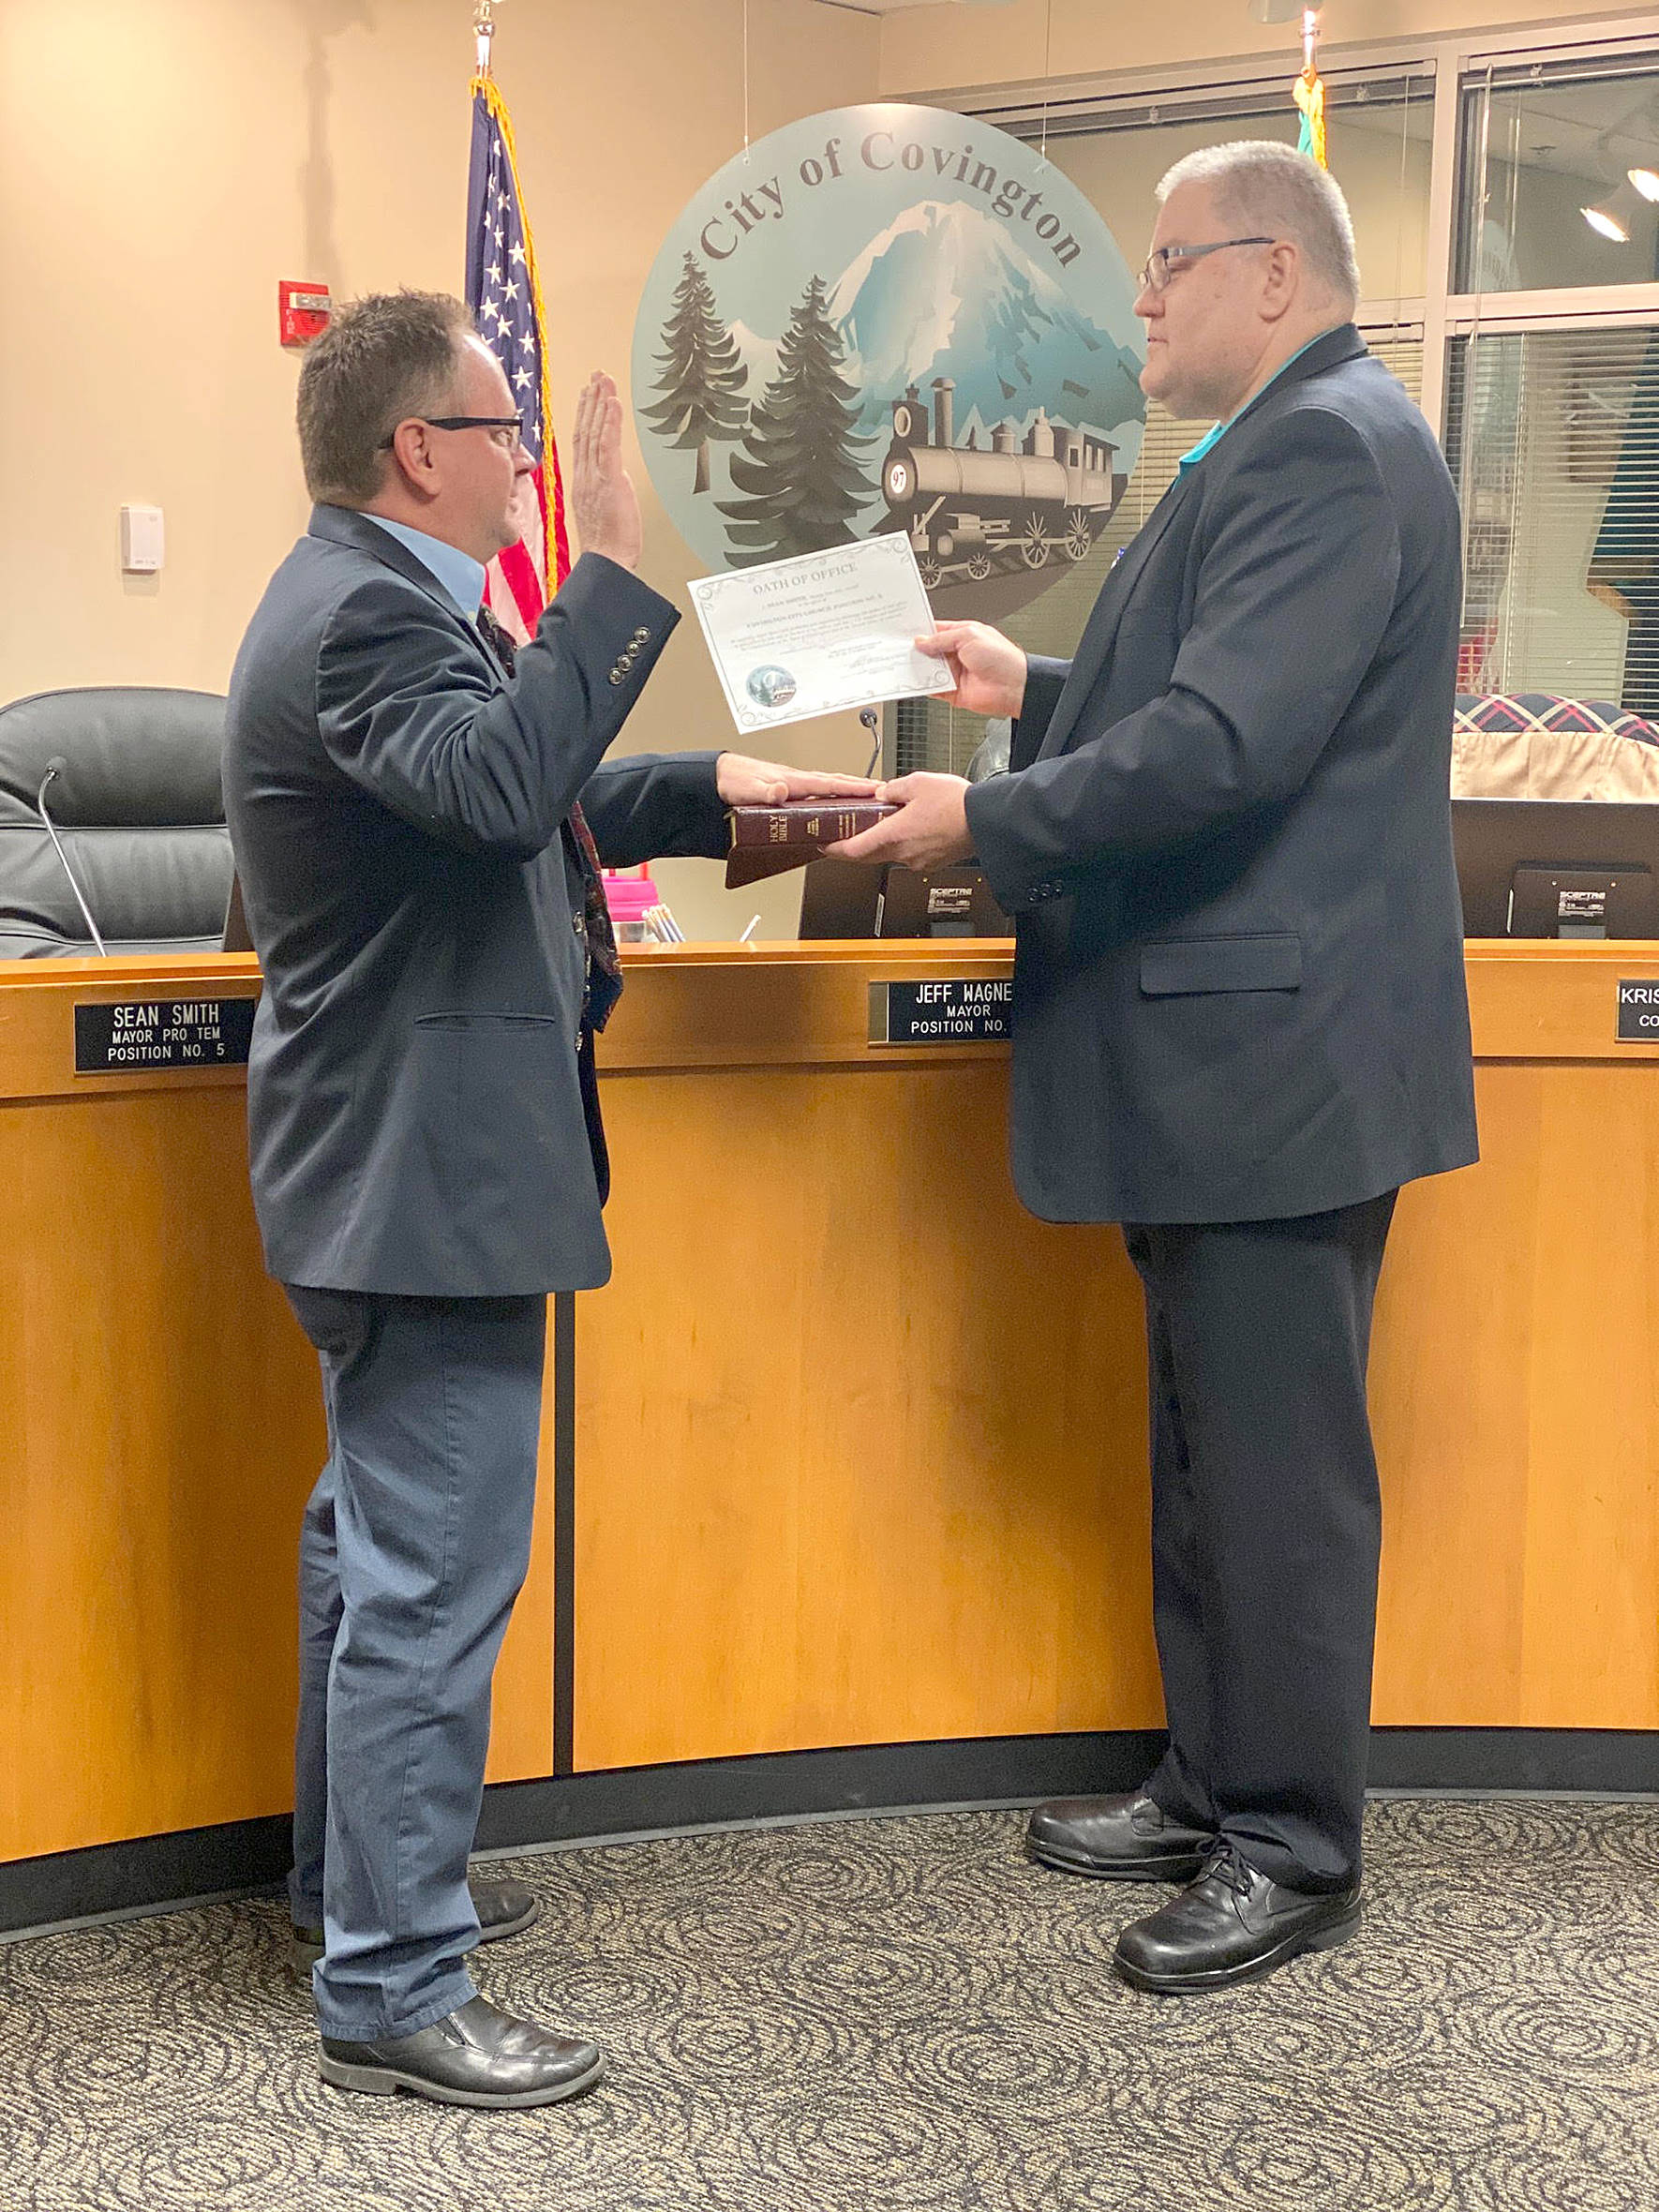 Mayor Jeff Wagner swears in Mayor Pro Tem Sean Smith during the Tuesday, Jan. 14, 2020 Covington City Council meeting. Photo by Karla Slate.